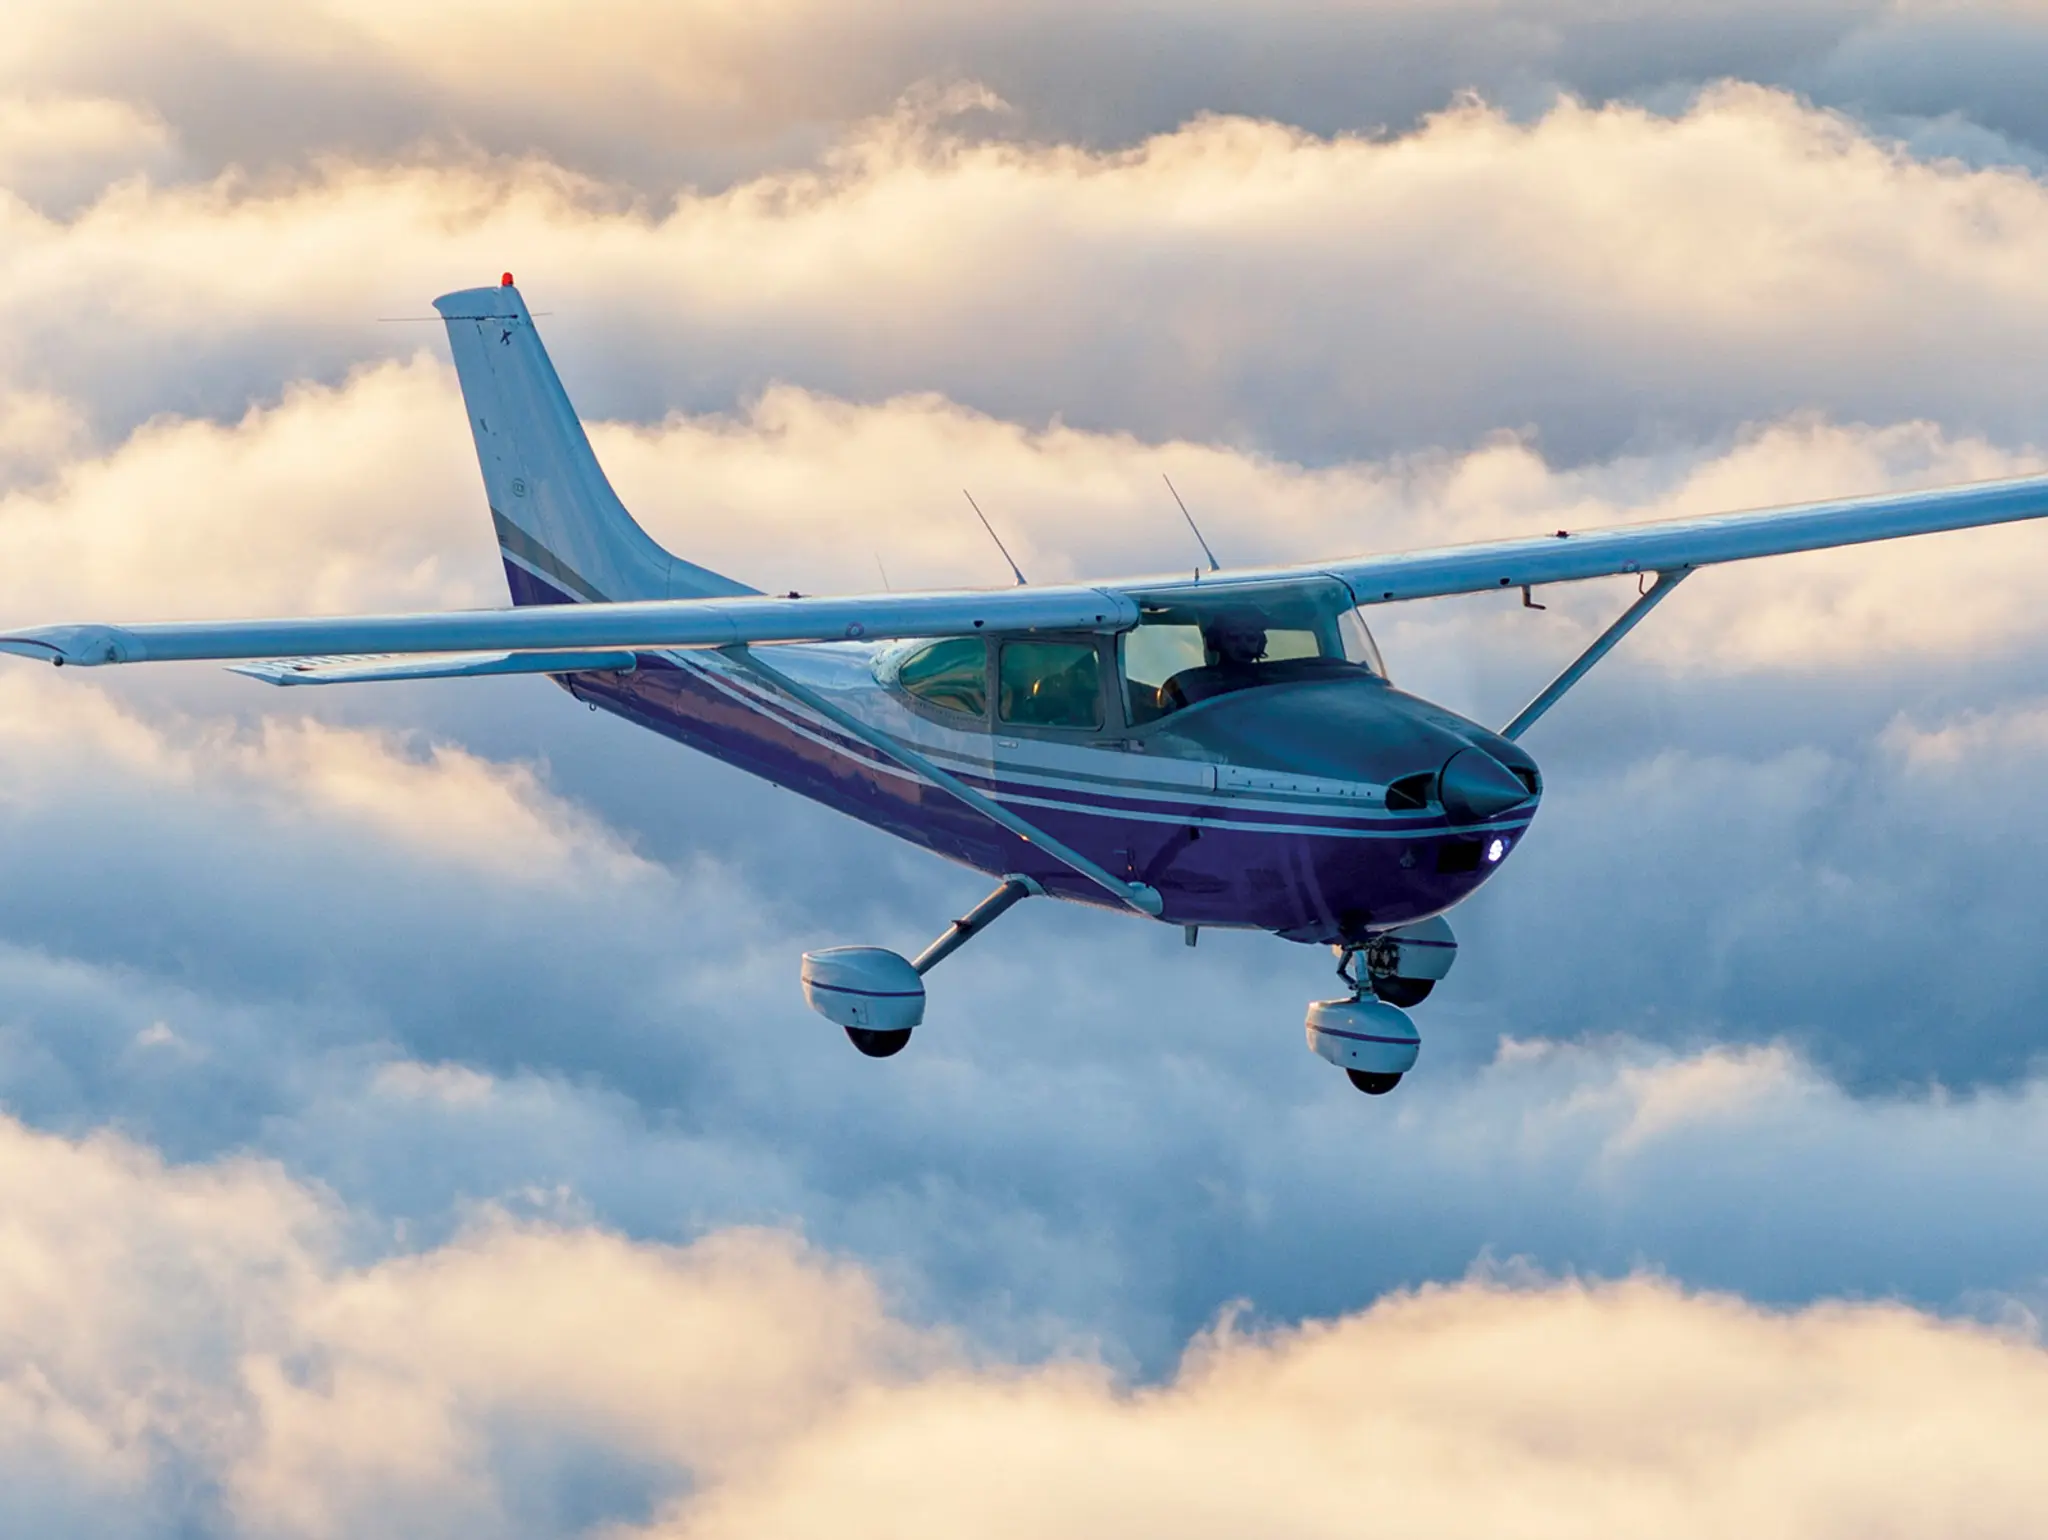 The Freedom of Private Aviation Renewed